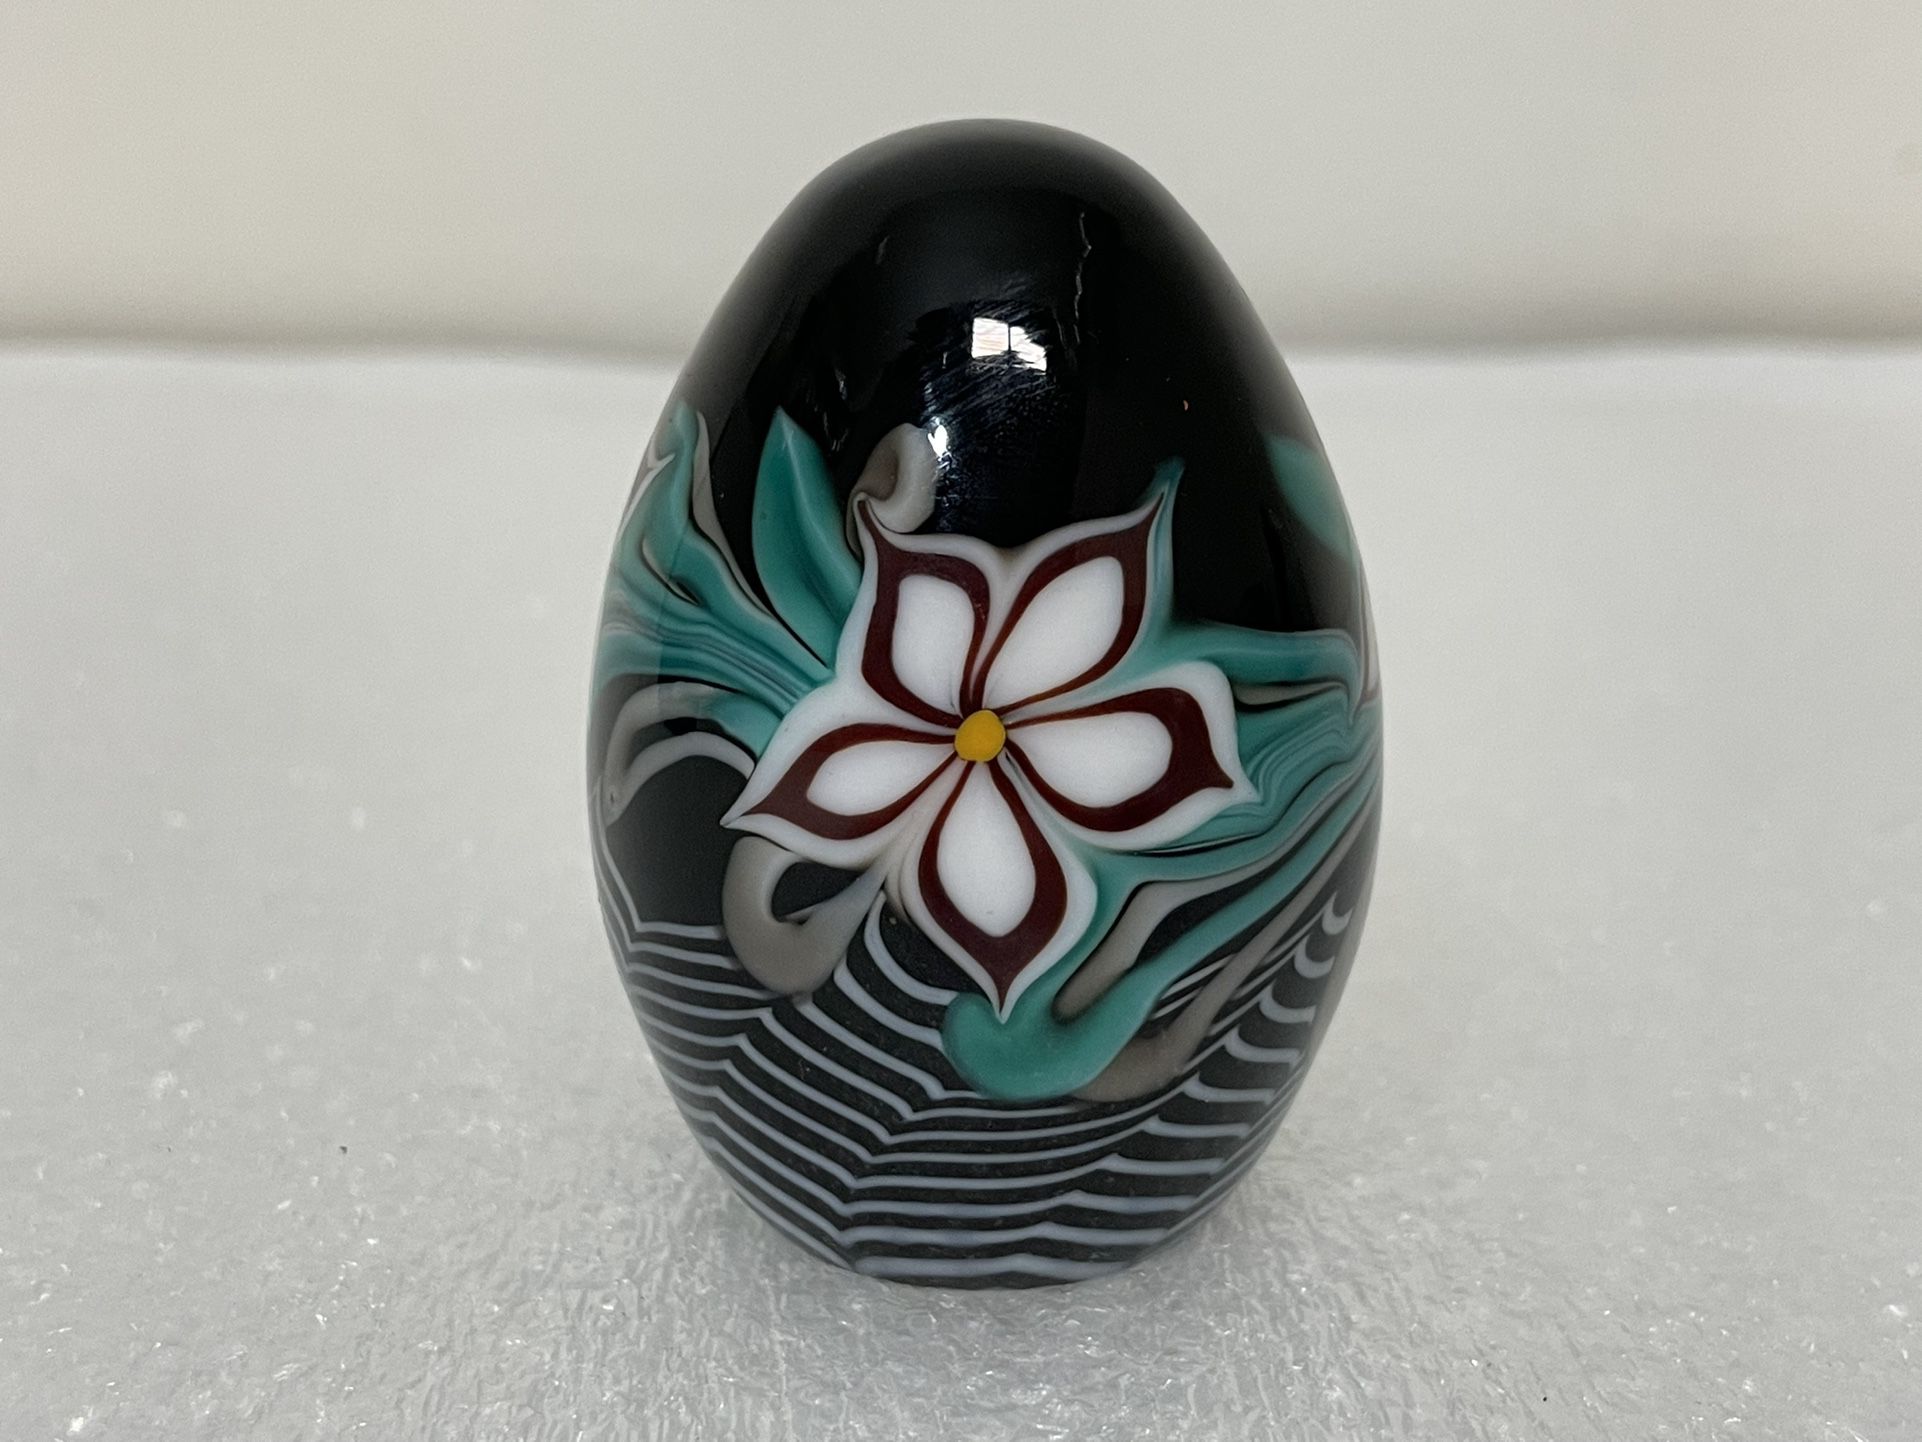 Vintage Grant Randolph Studios Glass Egg Paperweight Groovy ~ Psychedelic Flower